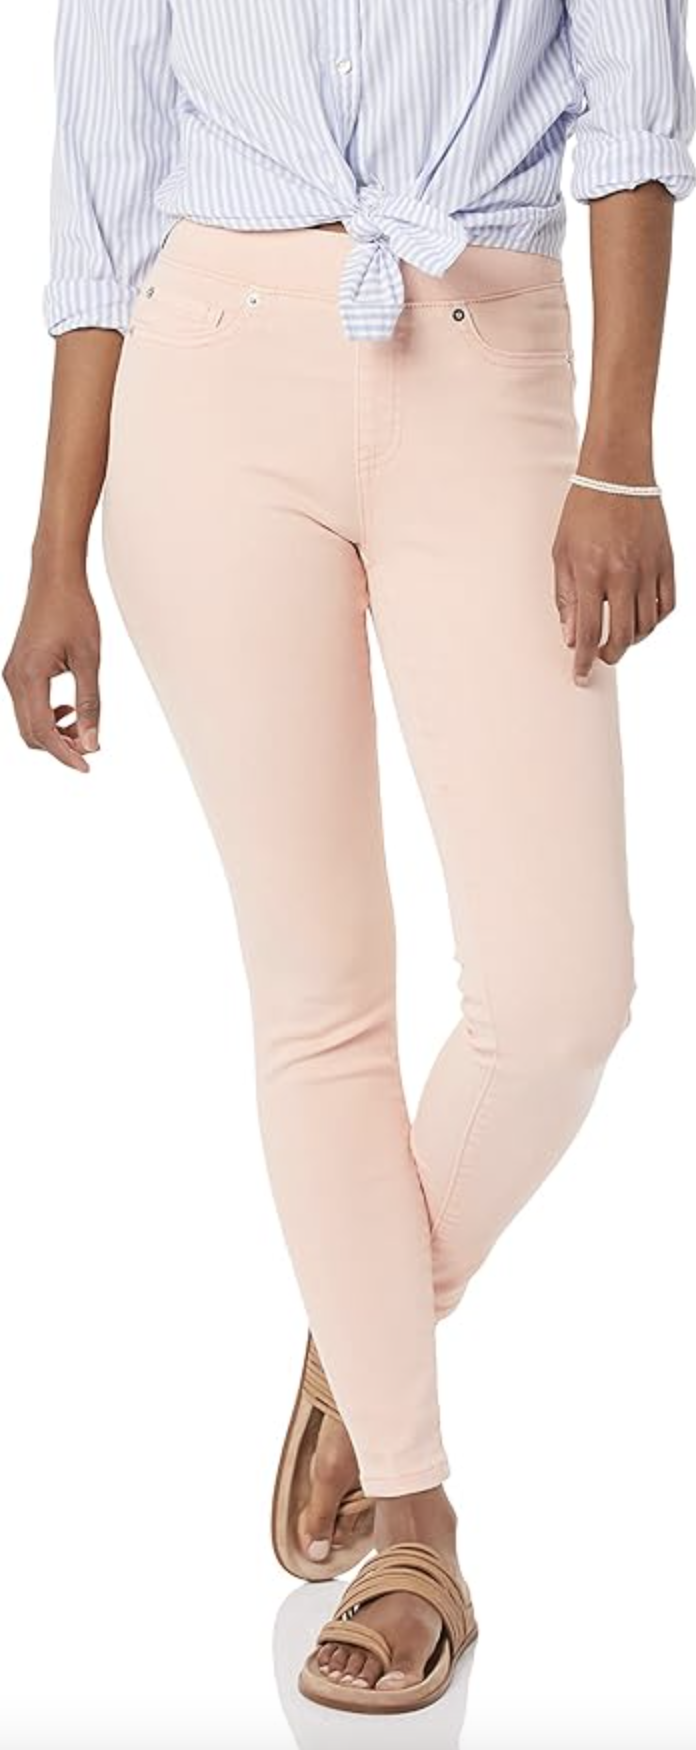 Amazon Essentials Women's Stretch Pull-On Jegging